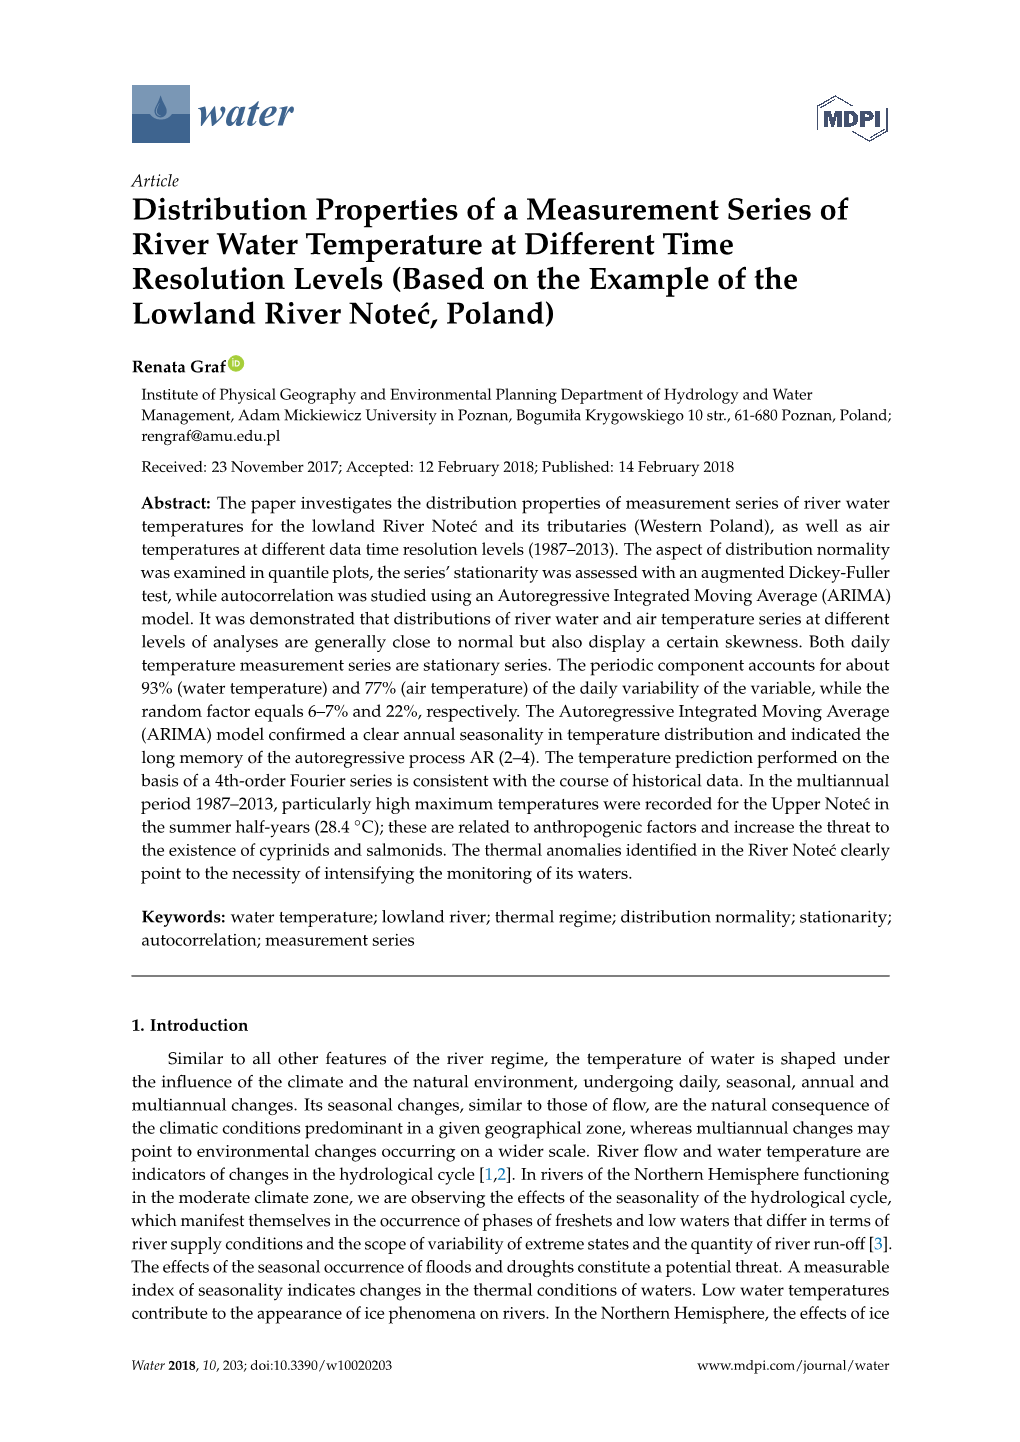 Distribution Properties of a Measurement Series of River Water Temperature at Different Time Resolution Levels